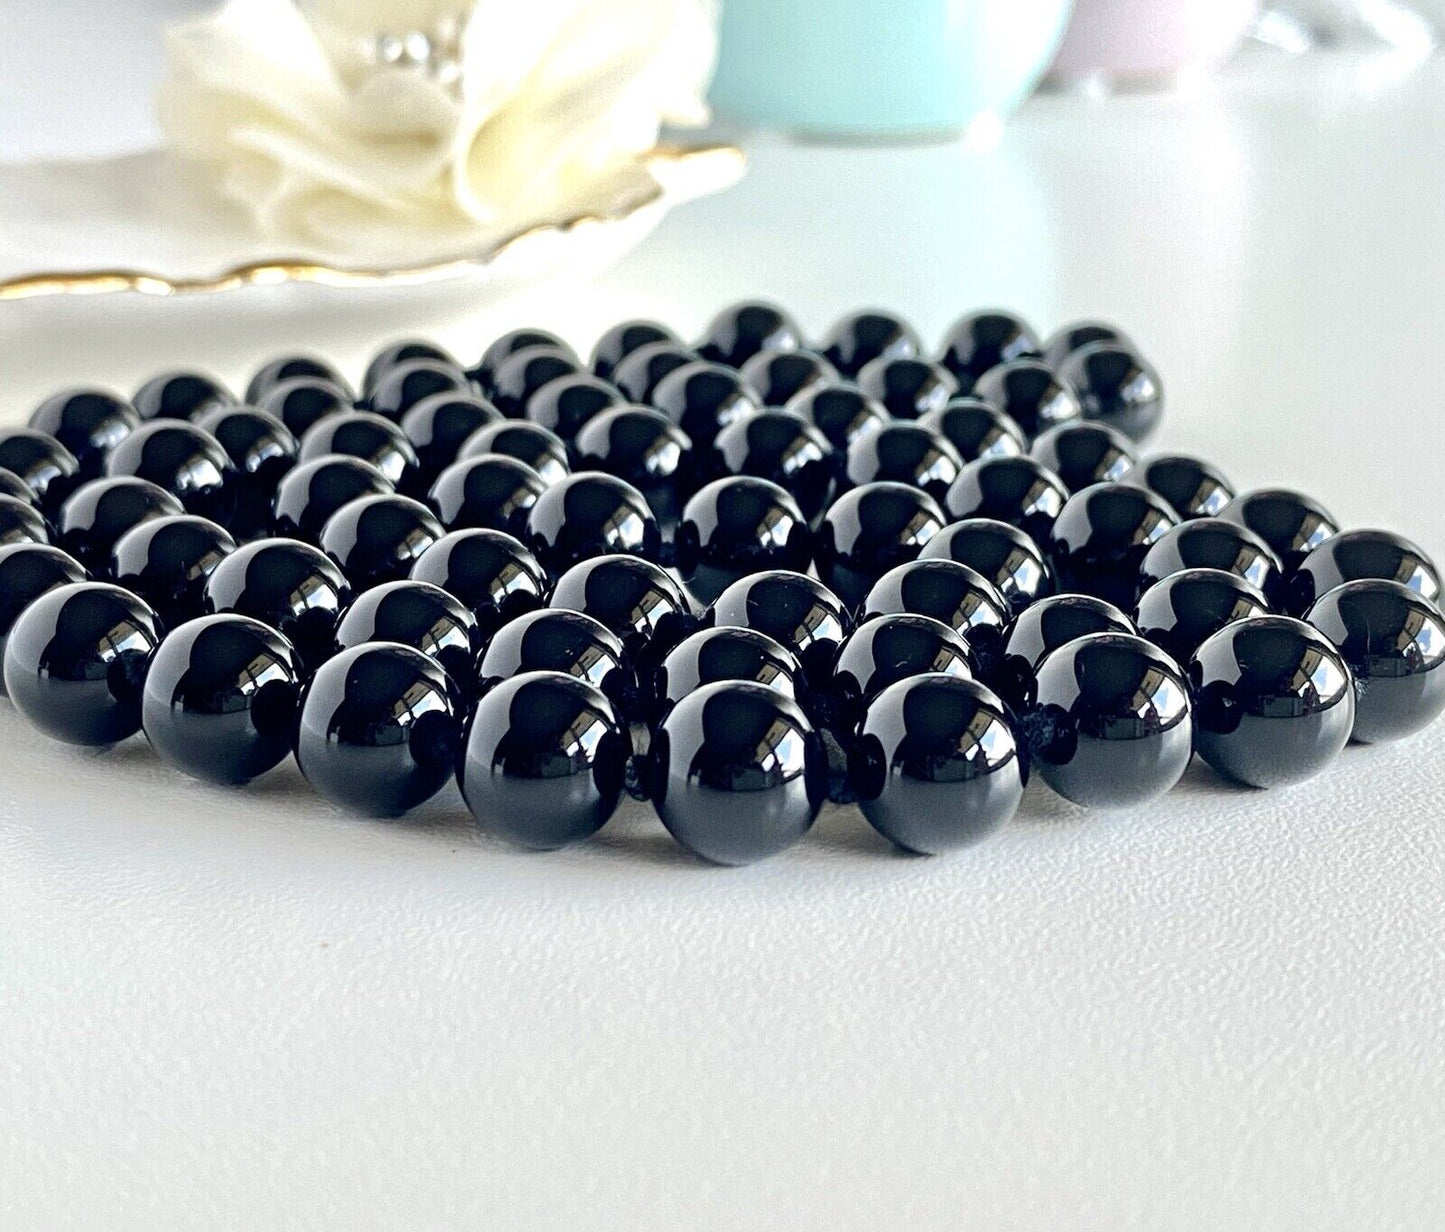 Genuine 10mm Black Onyx Knotted Endless Necklace, New, 32"